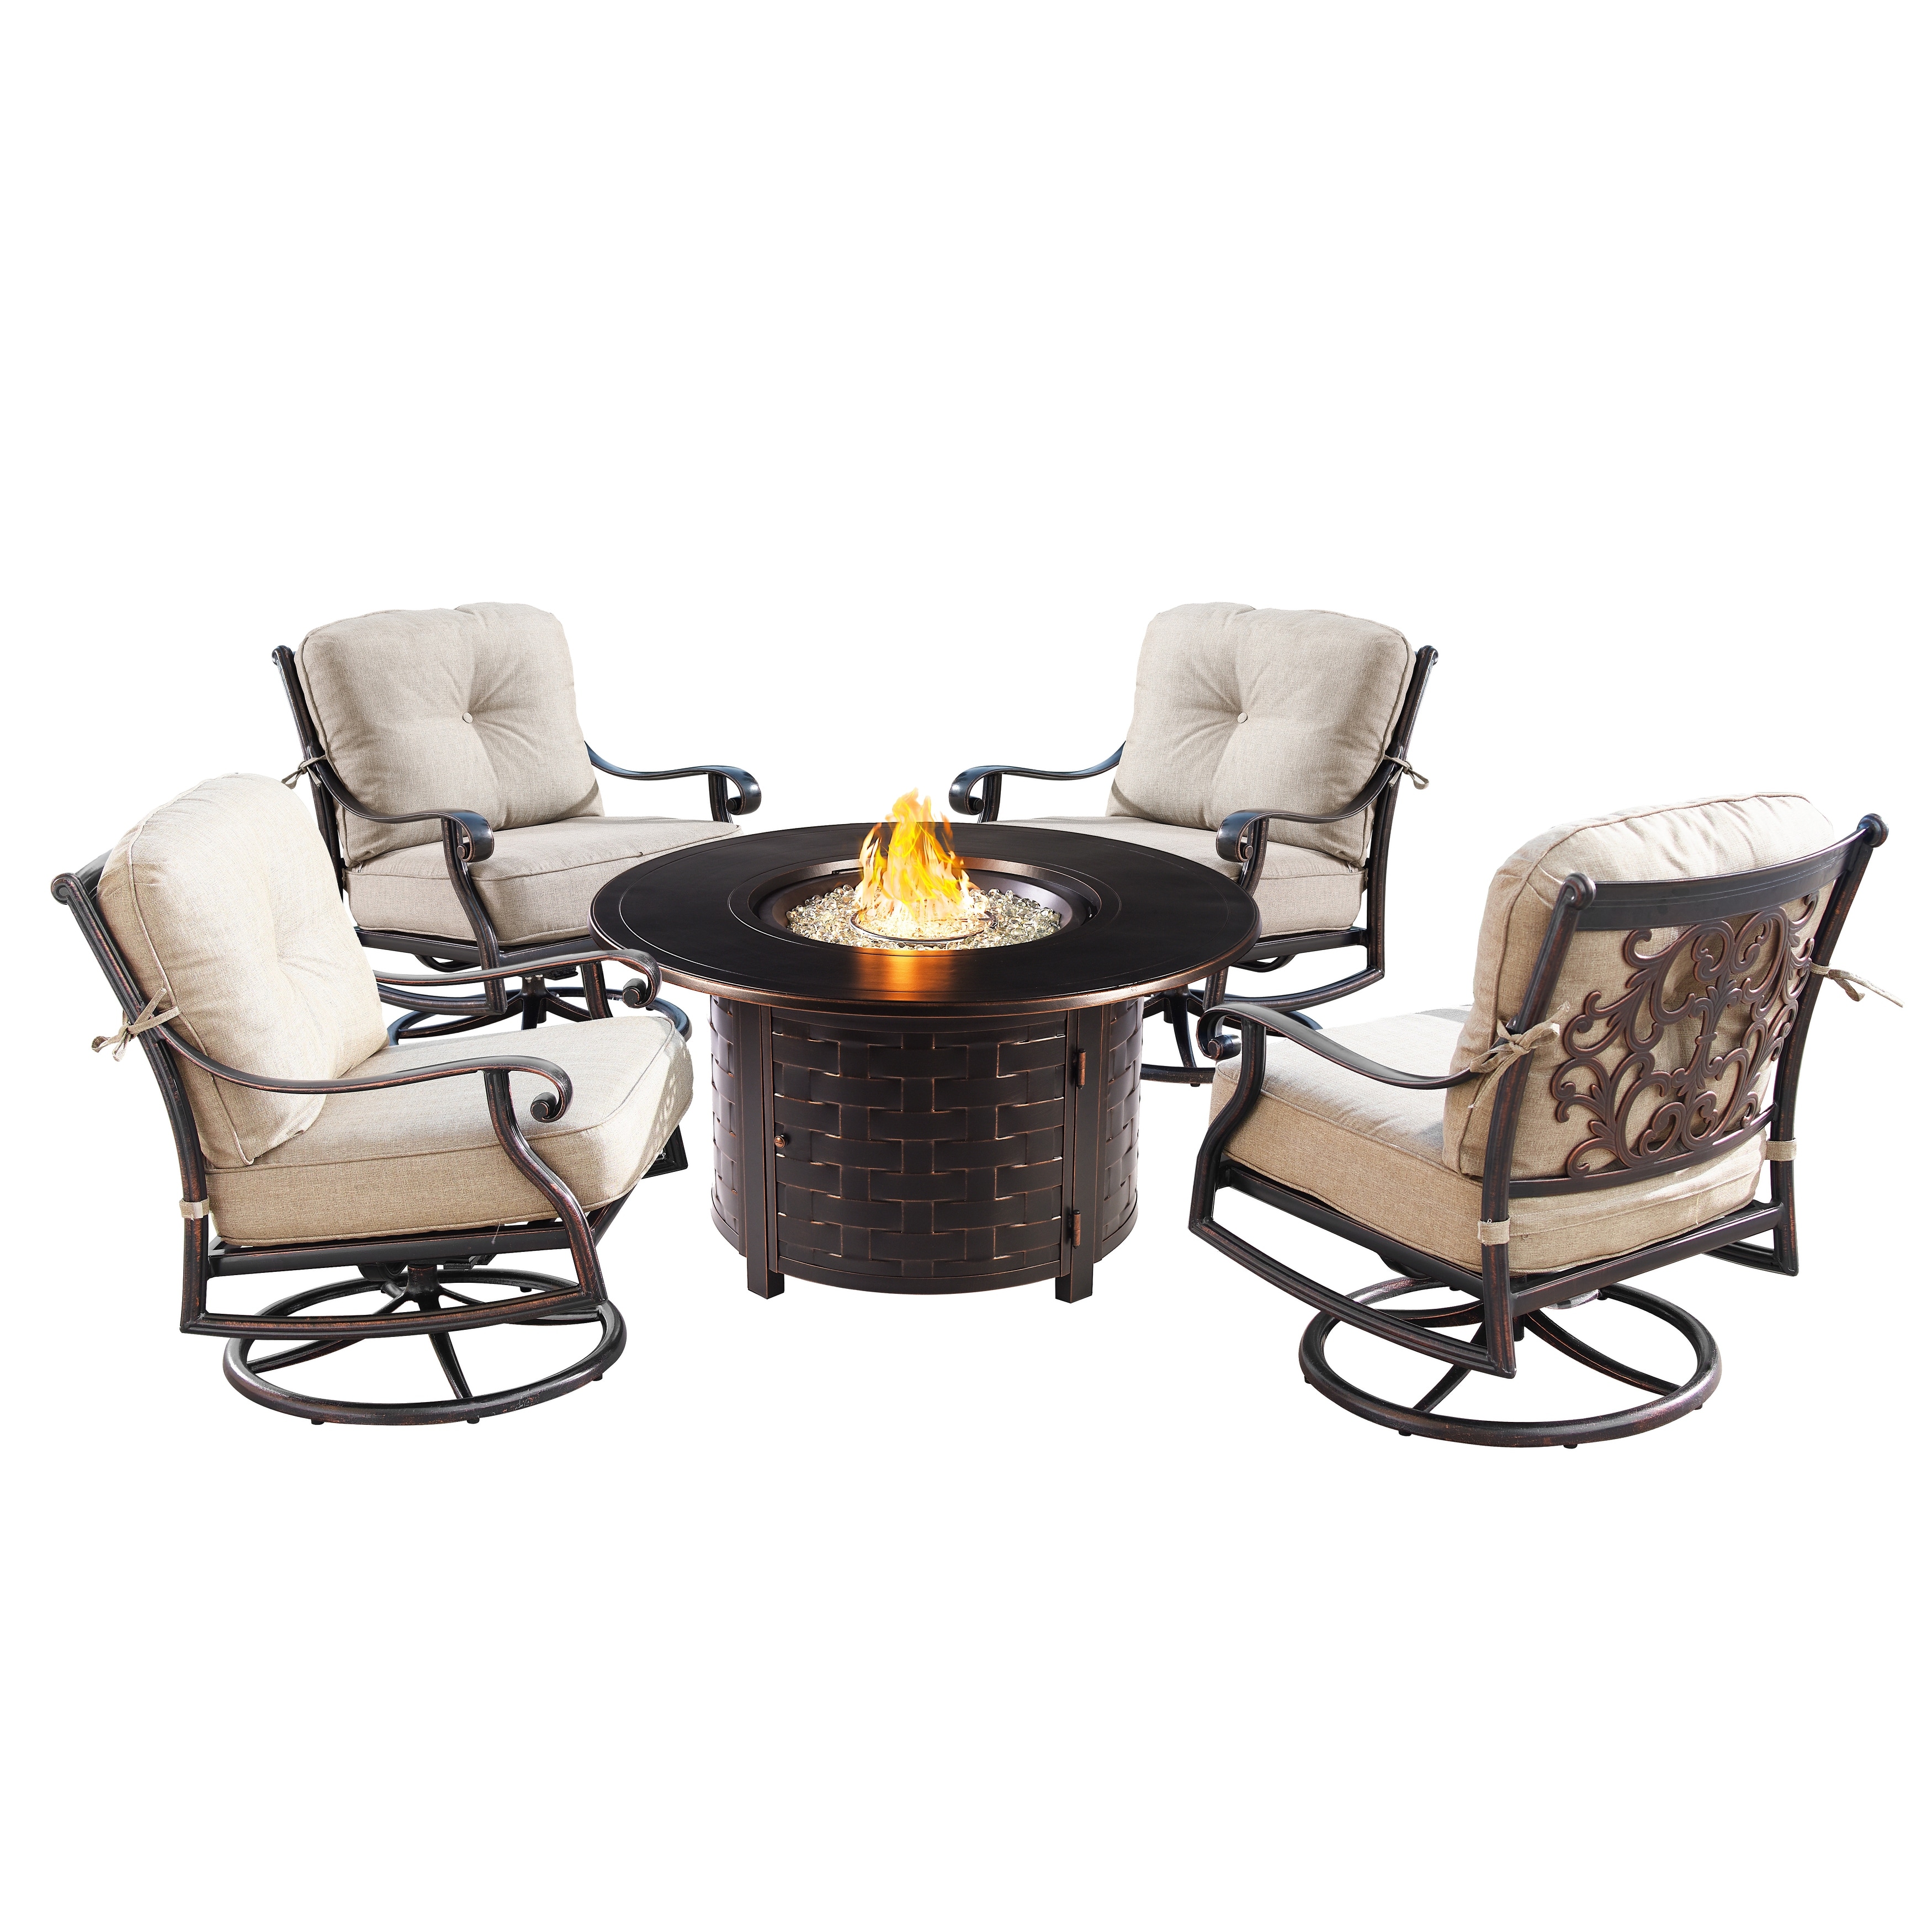 Outdoor Aluminum 44 In. Round Fire Table Set With Four Deep Seating Swivel Rocking Chairs and Accessories